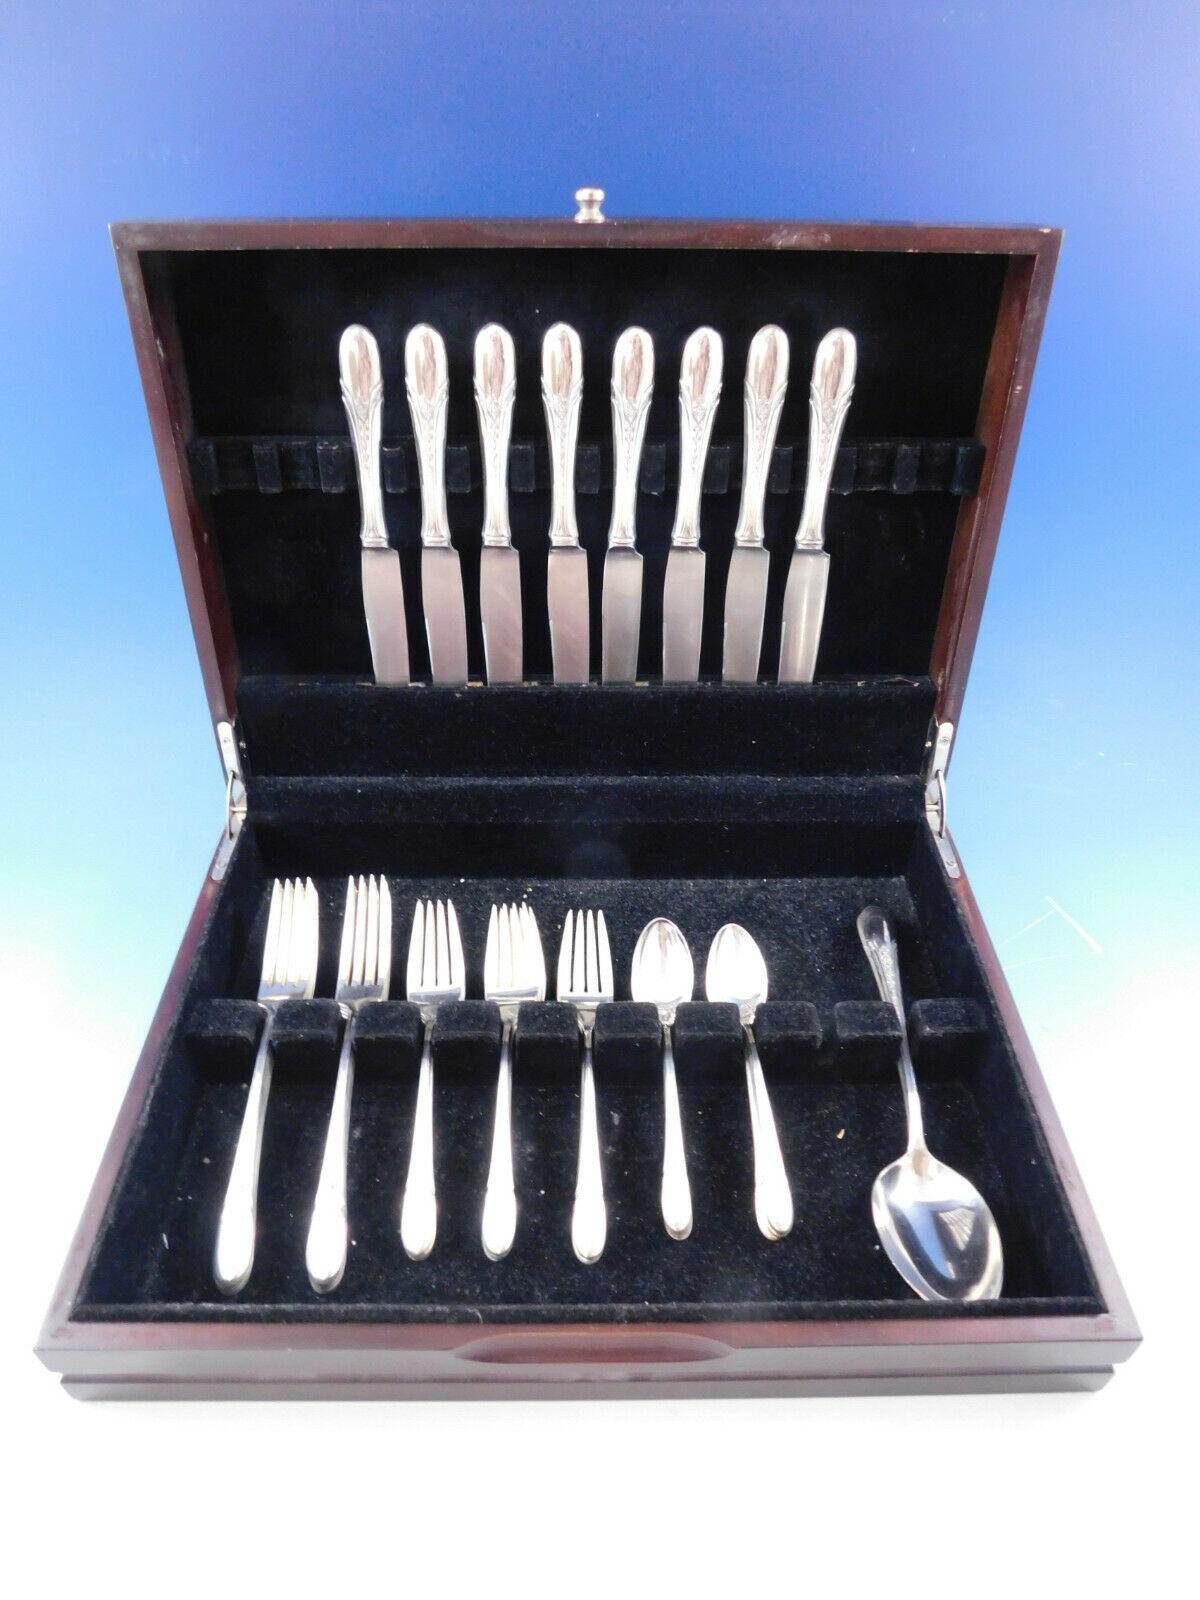 Symphony chased by Towle circa 1934 sterling silver Flatware set, 34 pieces. This set includes:

8 knives, 9 1/4